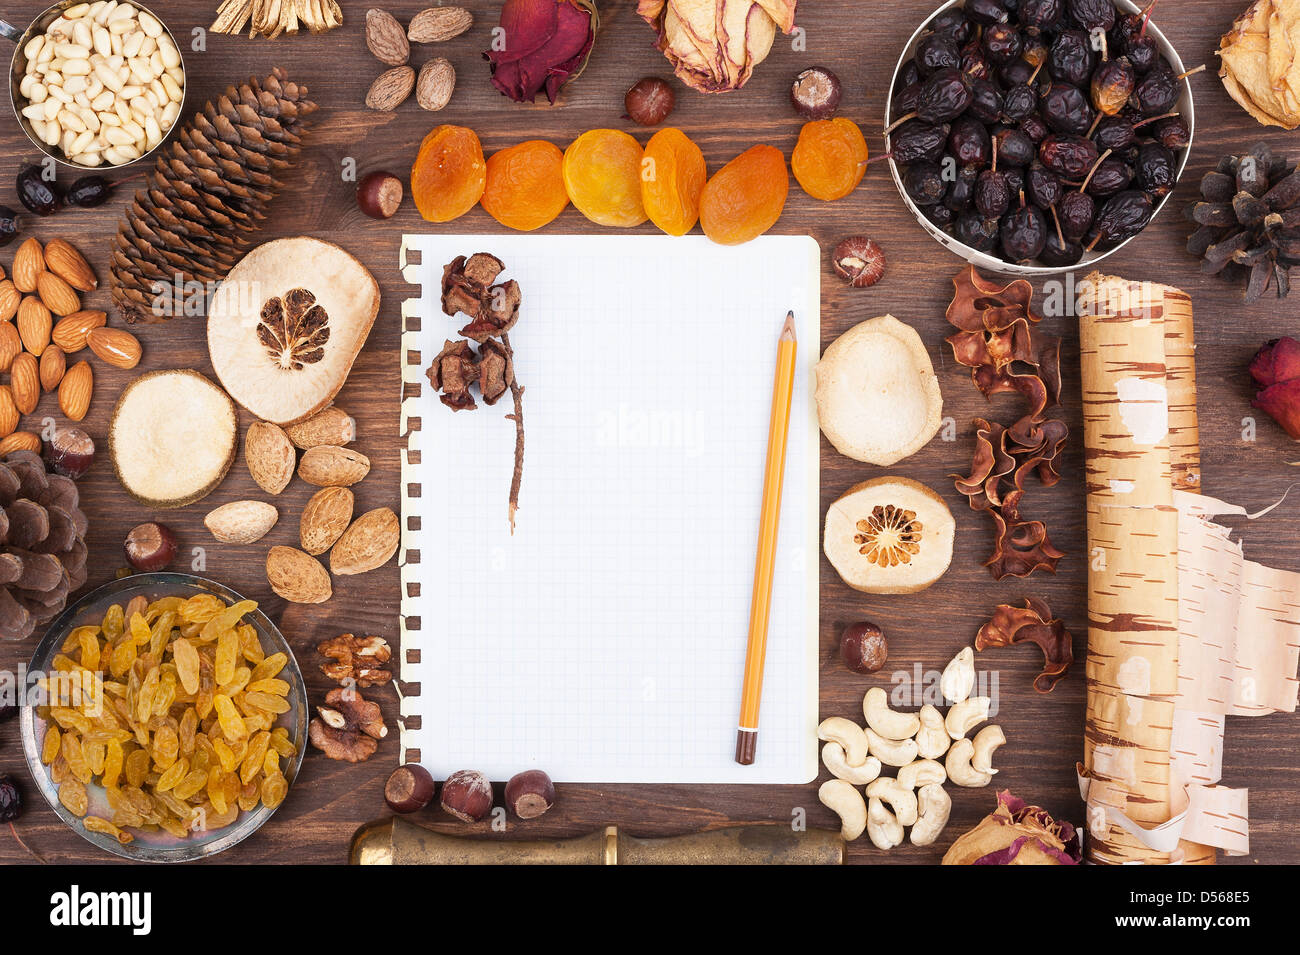 White sheet of paper with a pencil in an environment of nuts and fruits Stock Photo